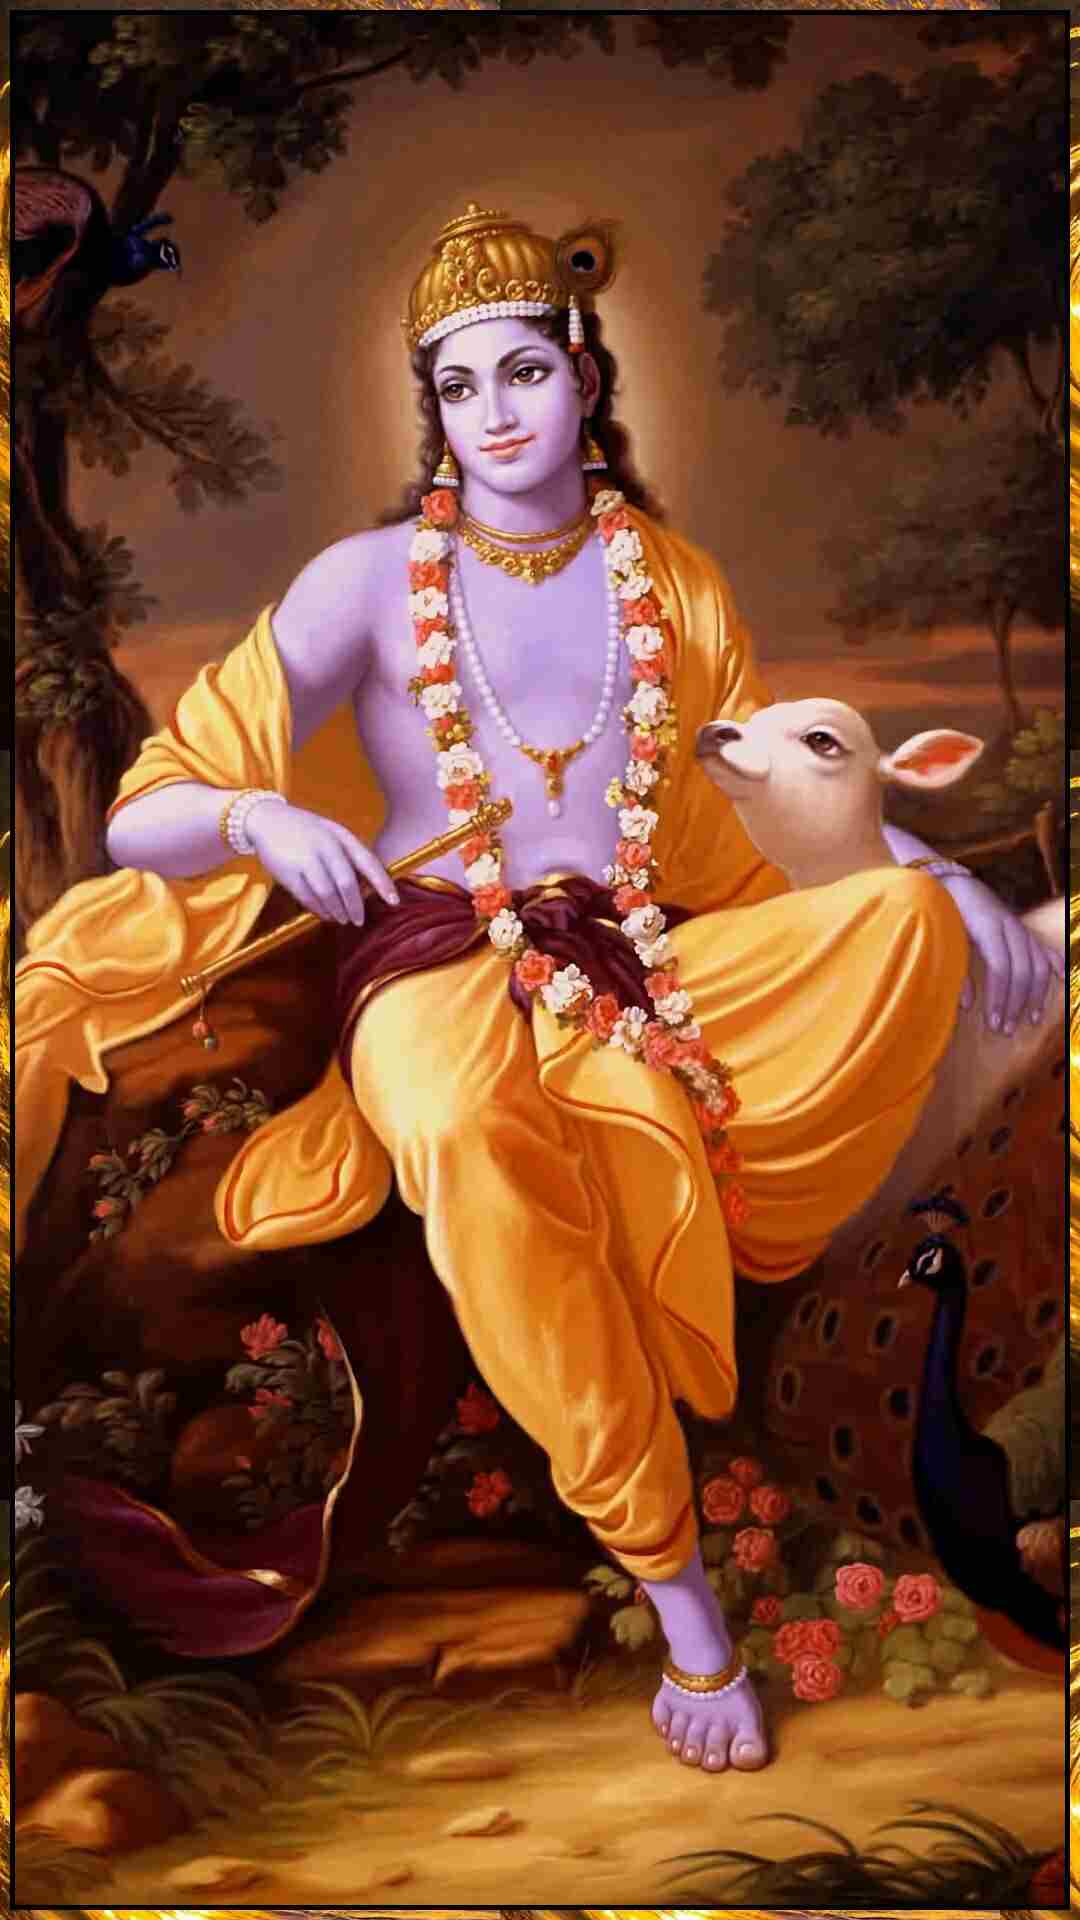 krishna images free download for mobile
